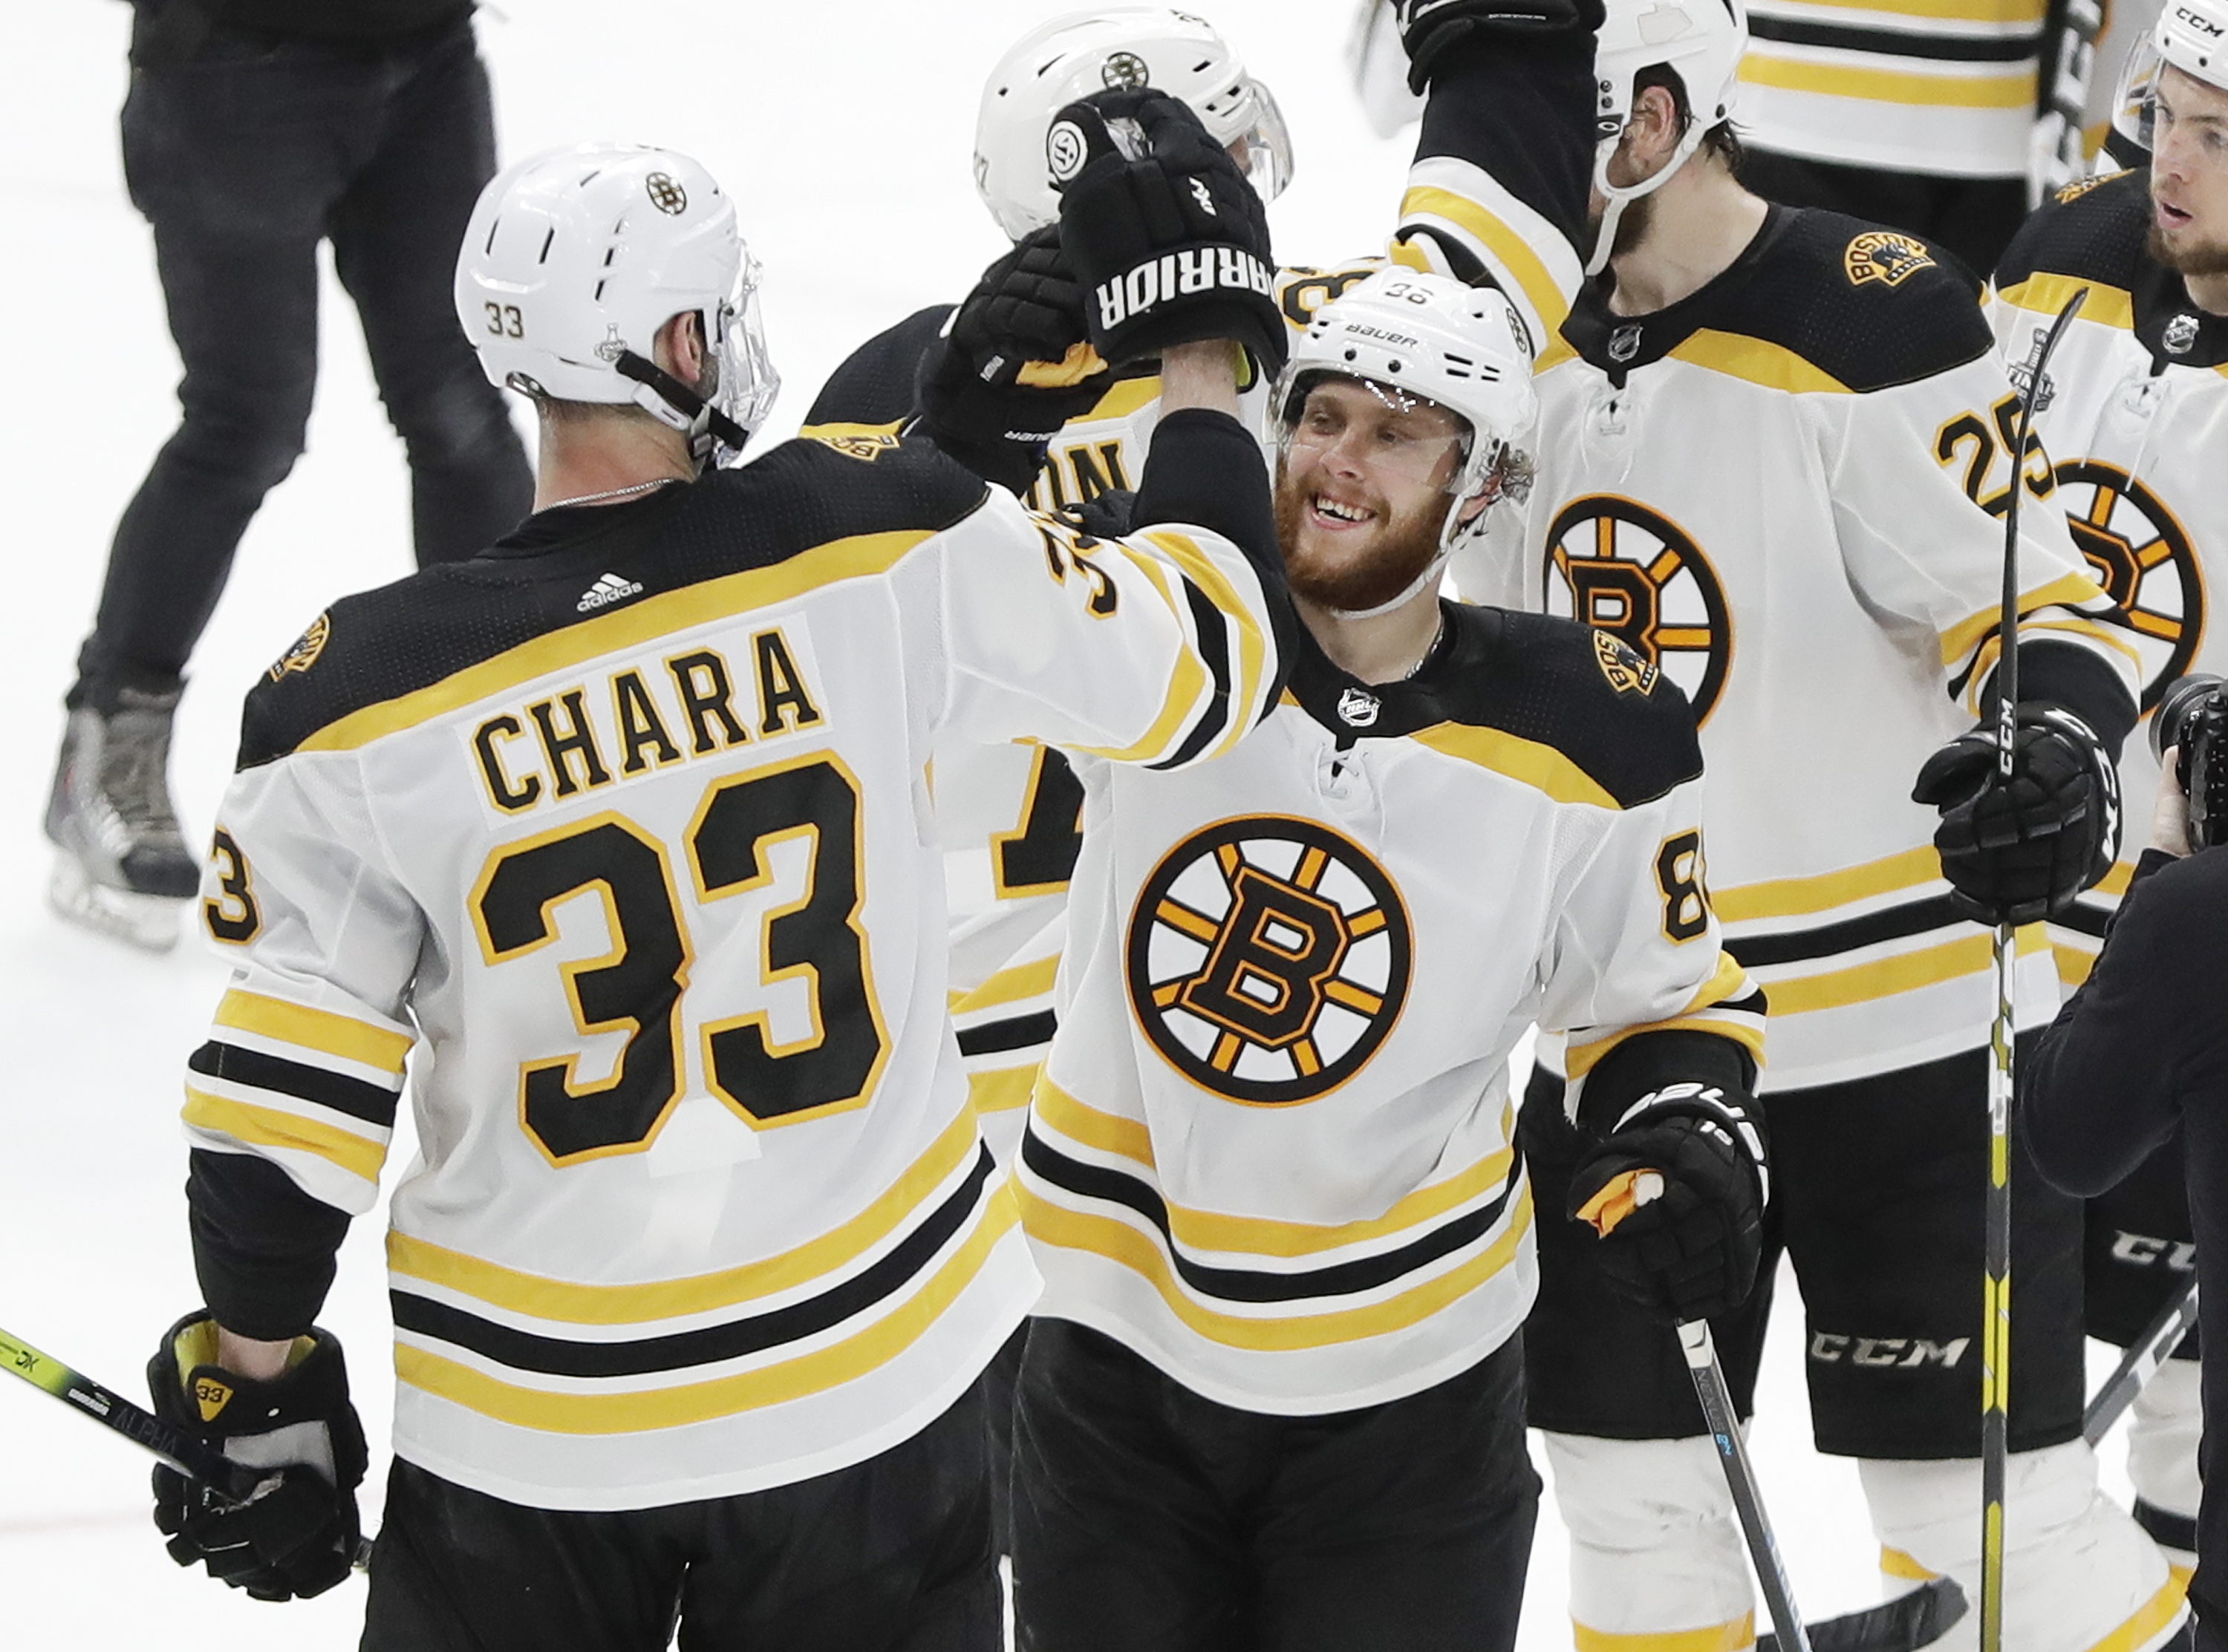 Big, bad Bruins are back, force Cup Final Game 7 vs. Blues